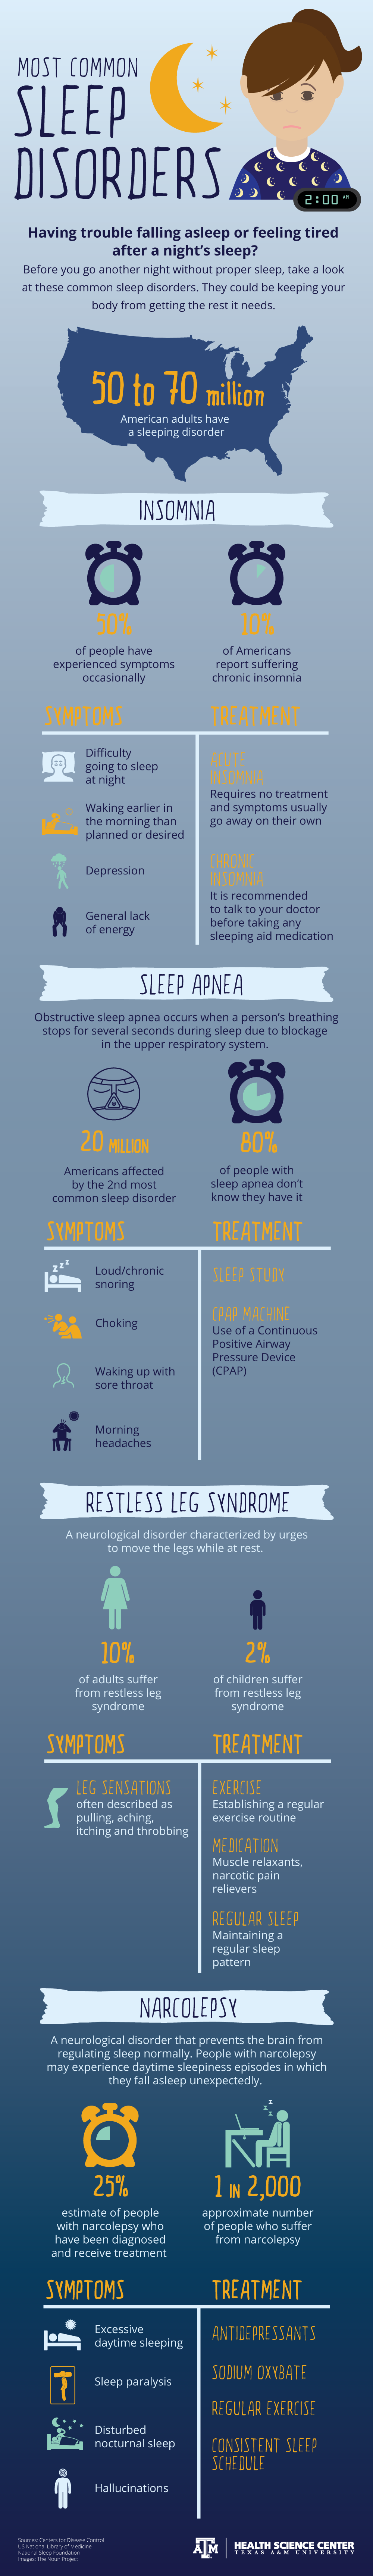 common sleep disorders infographic including insomnia, restless leg syndrome, narcolepsy and sleep apnea